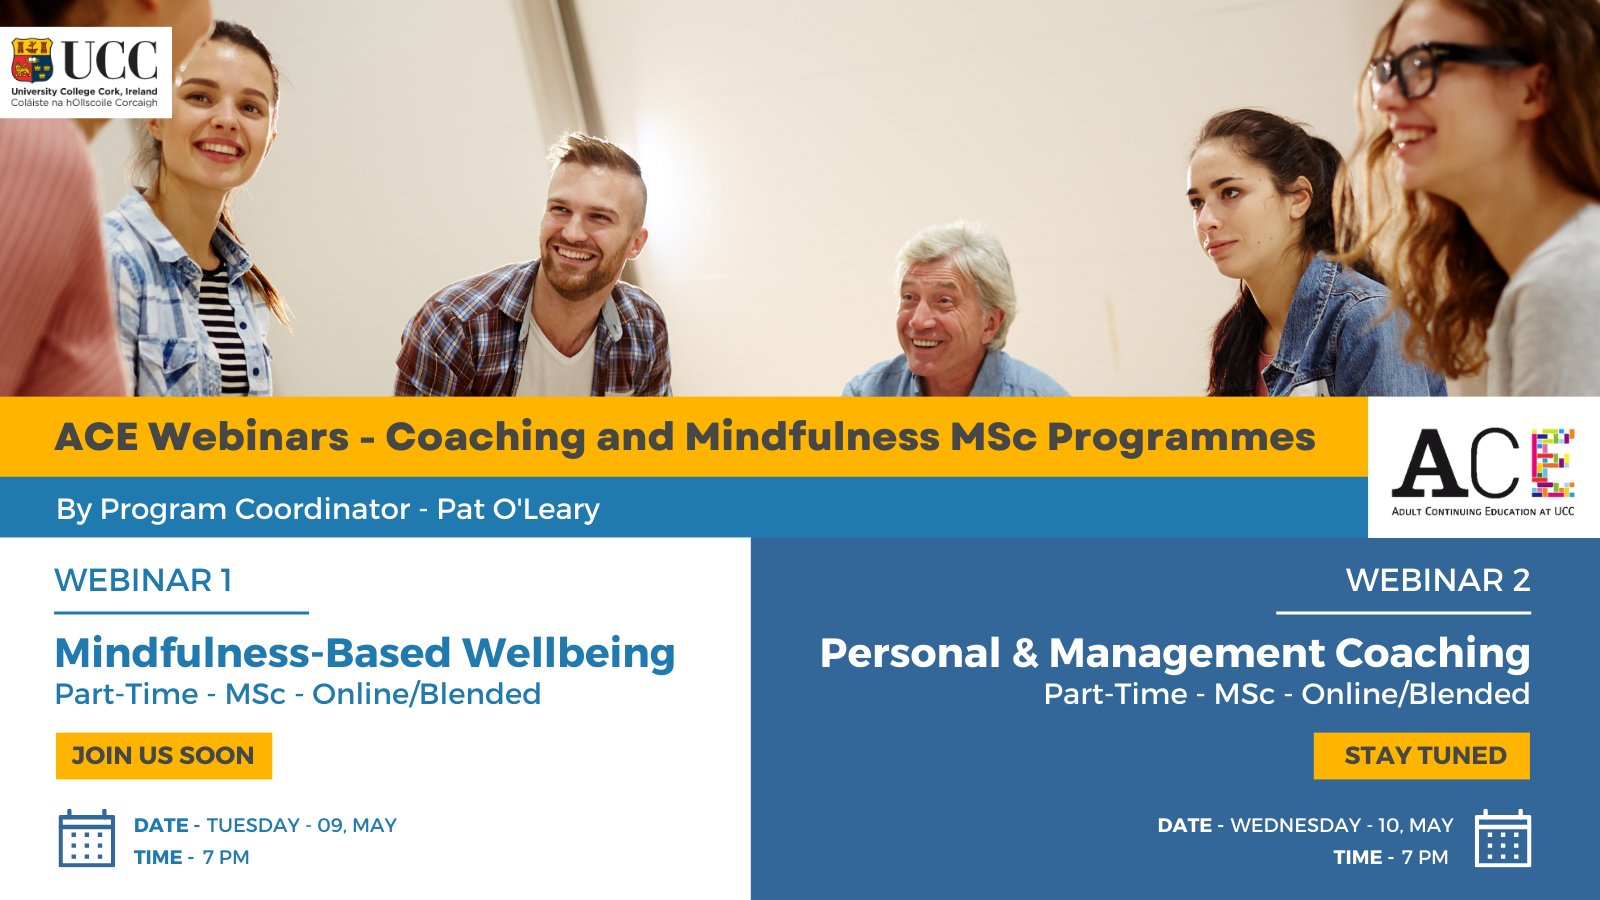 ACE Webinars for the MSc in Mindfulness Based Wellbeing and MSc in Personal and Management Coaching